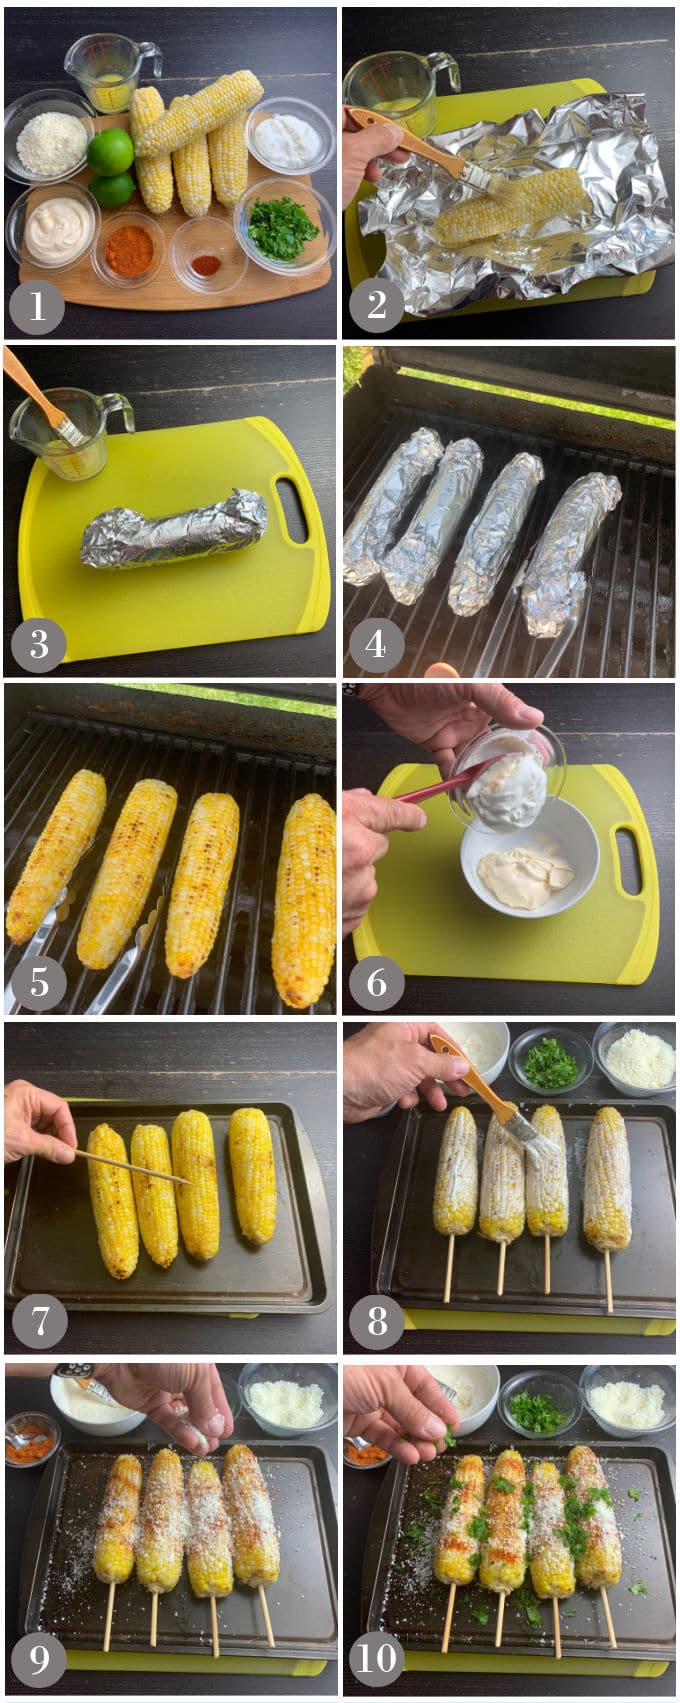 A collage of photos showing the steps to make Mexican style street corn on the cob or elote. 